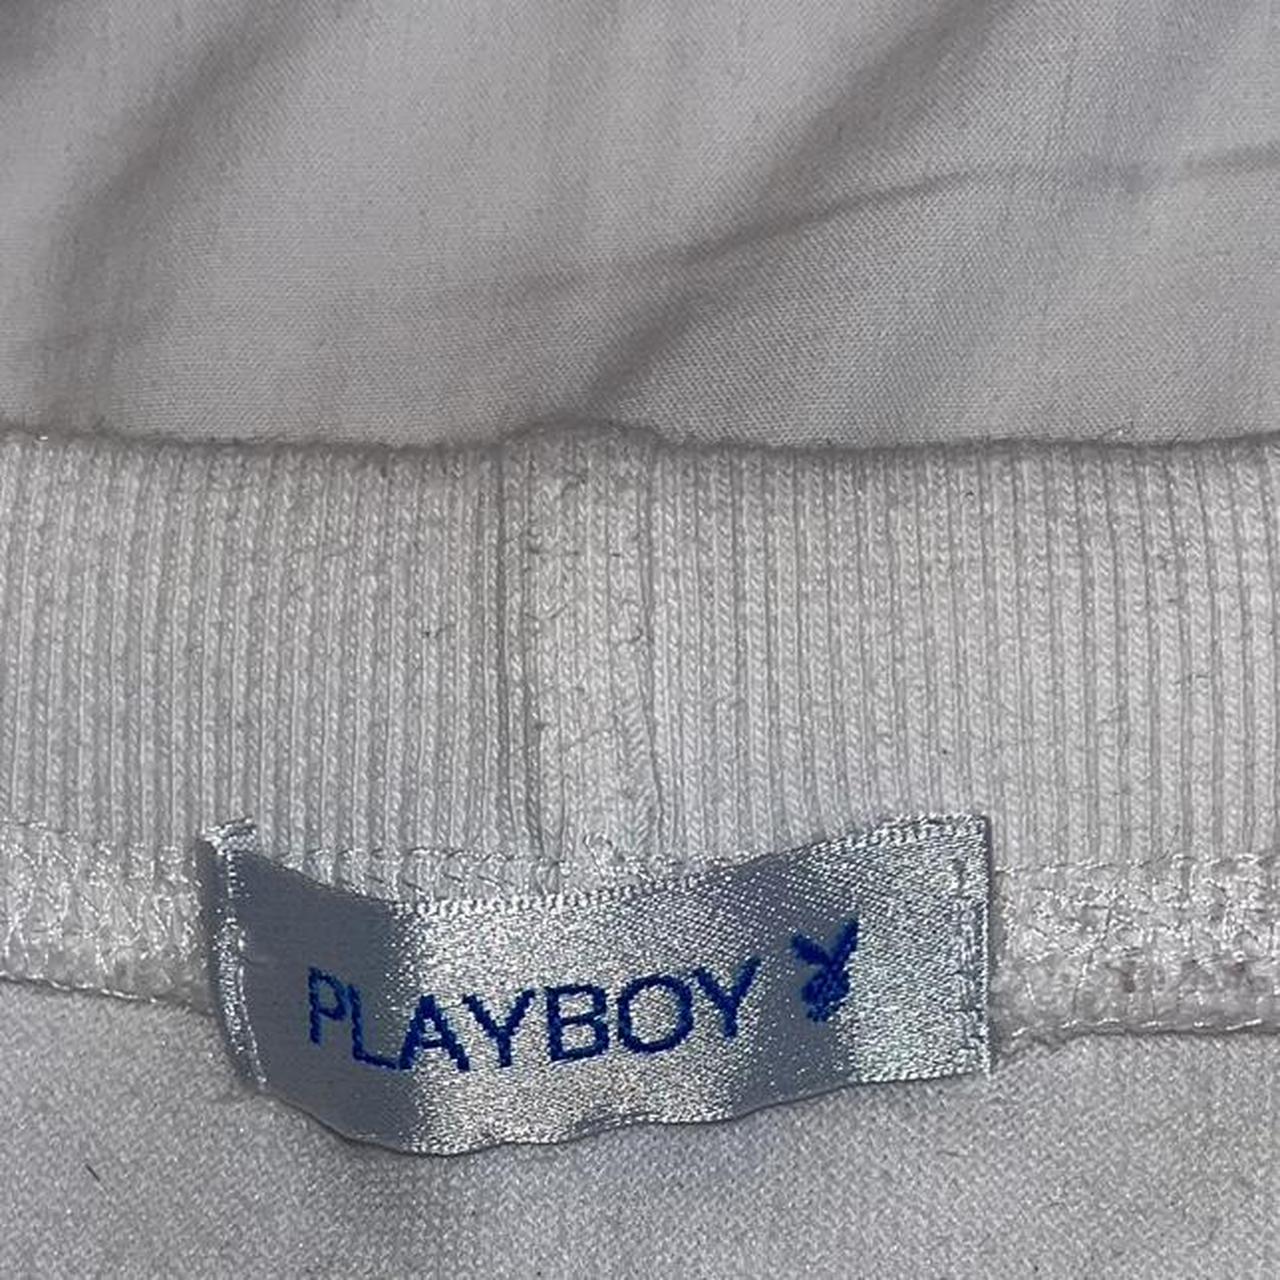 Playboy Women's White and Pink Skirt | Depop